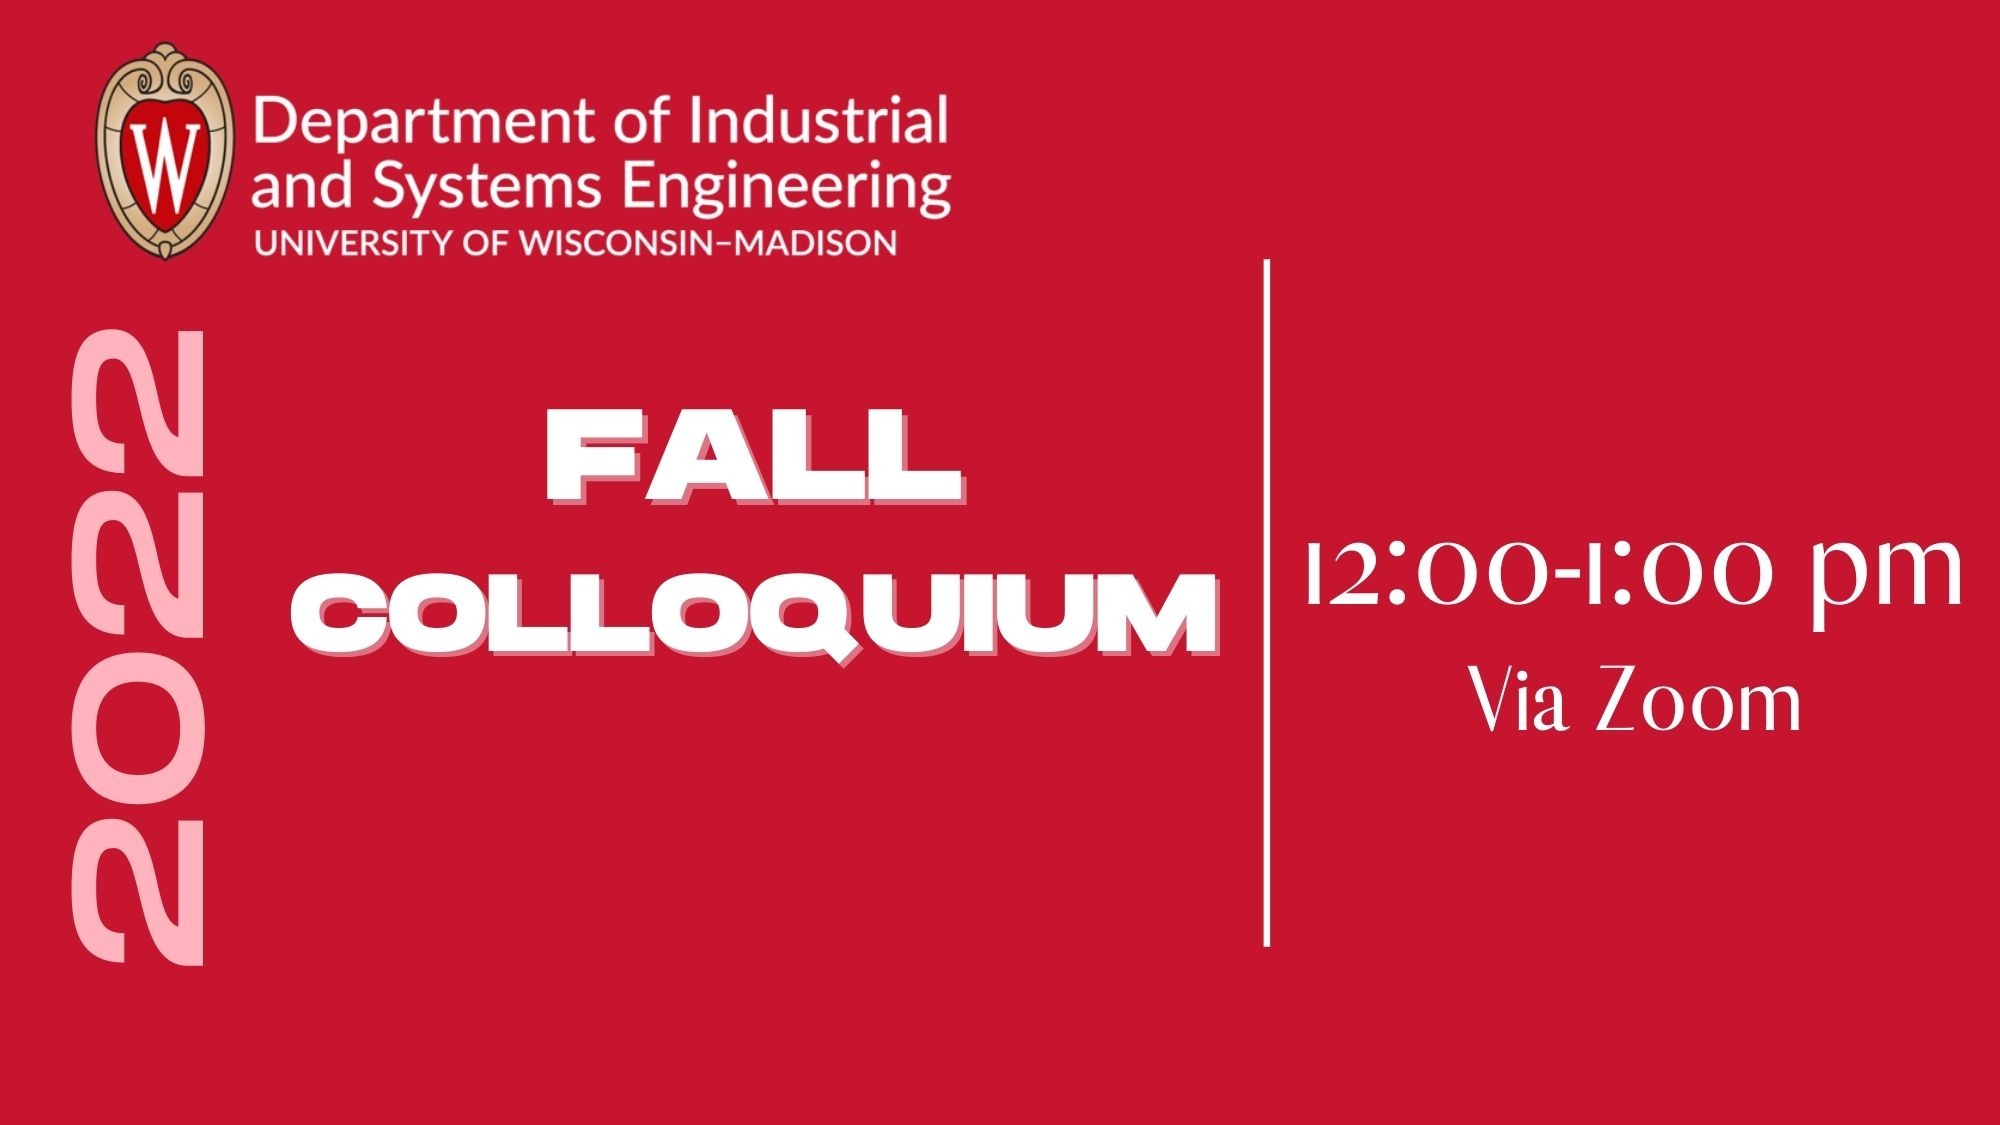 Fall Colloquium from 12:00PM-1:00PM via Zoom